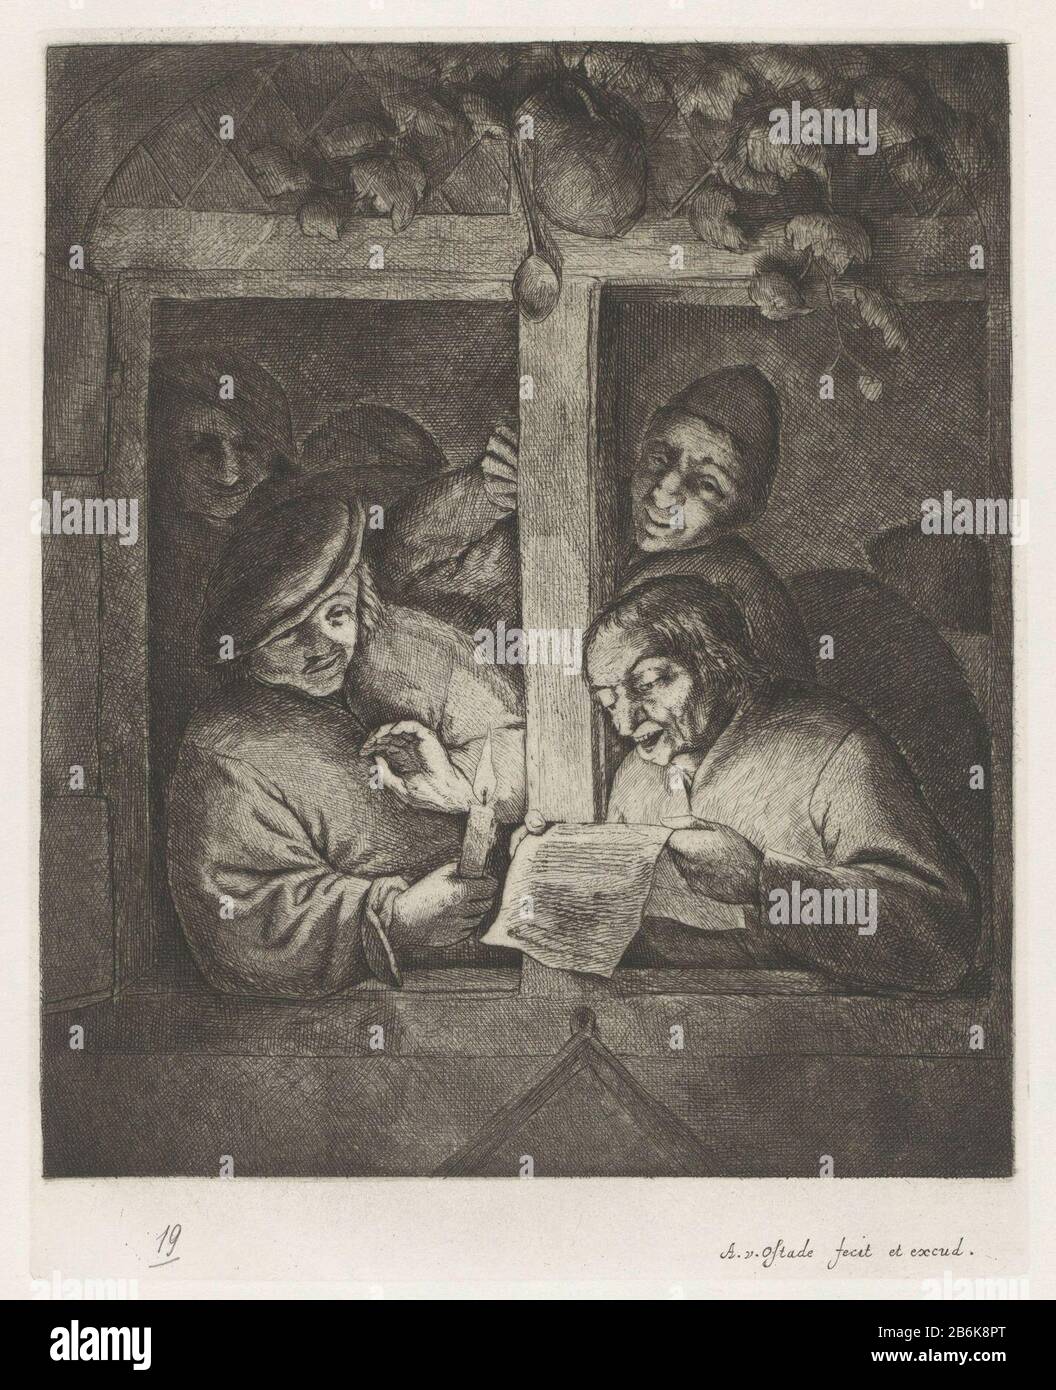 Three men sing from sheet of paper by candlelight in the open window Three men sing from sheet of paper by candlelight in open window object type: picture album leaf Item number: BI 1942-5-19Catalogusreferentie: Hollstein Dutch 19-7 (7) Marking / Brands: collector's mark, verso, stamped ' AUSTRIAN / Musm (Stamp similar Lugt 2166. Here a line under the M instead of two points.) collector's mark, verso, stamped: 'B' (Library Rijksmuseum.) Description: the three singers in an open window is a satire the literary meetings of the rhetoricians. The diamond-shaped insignia under the window refers to Stock Photo